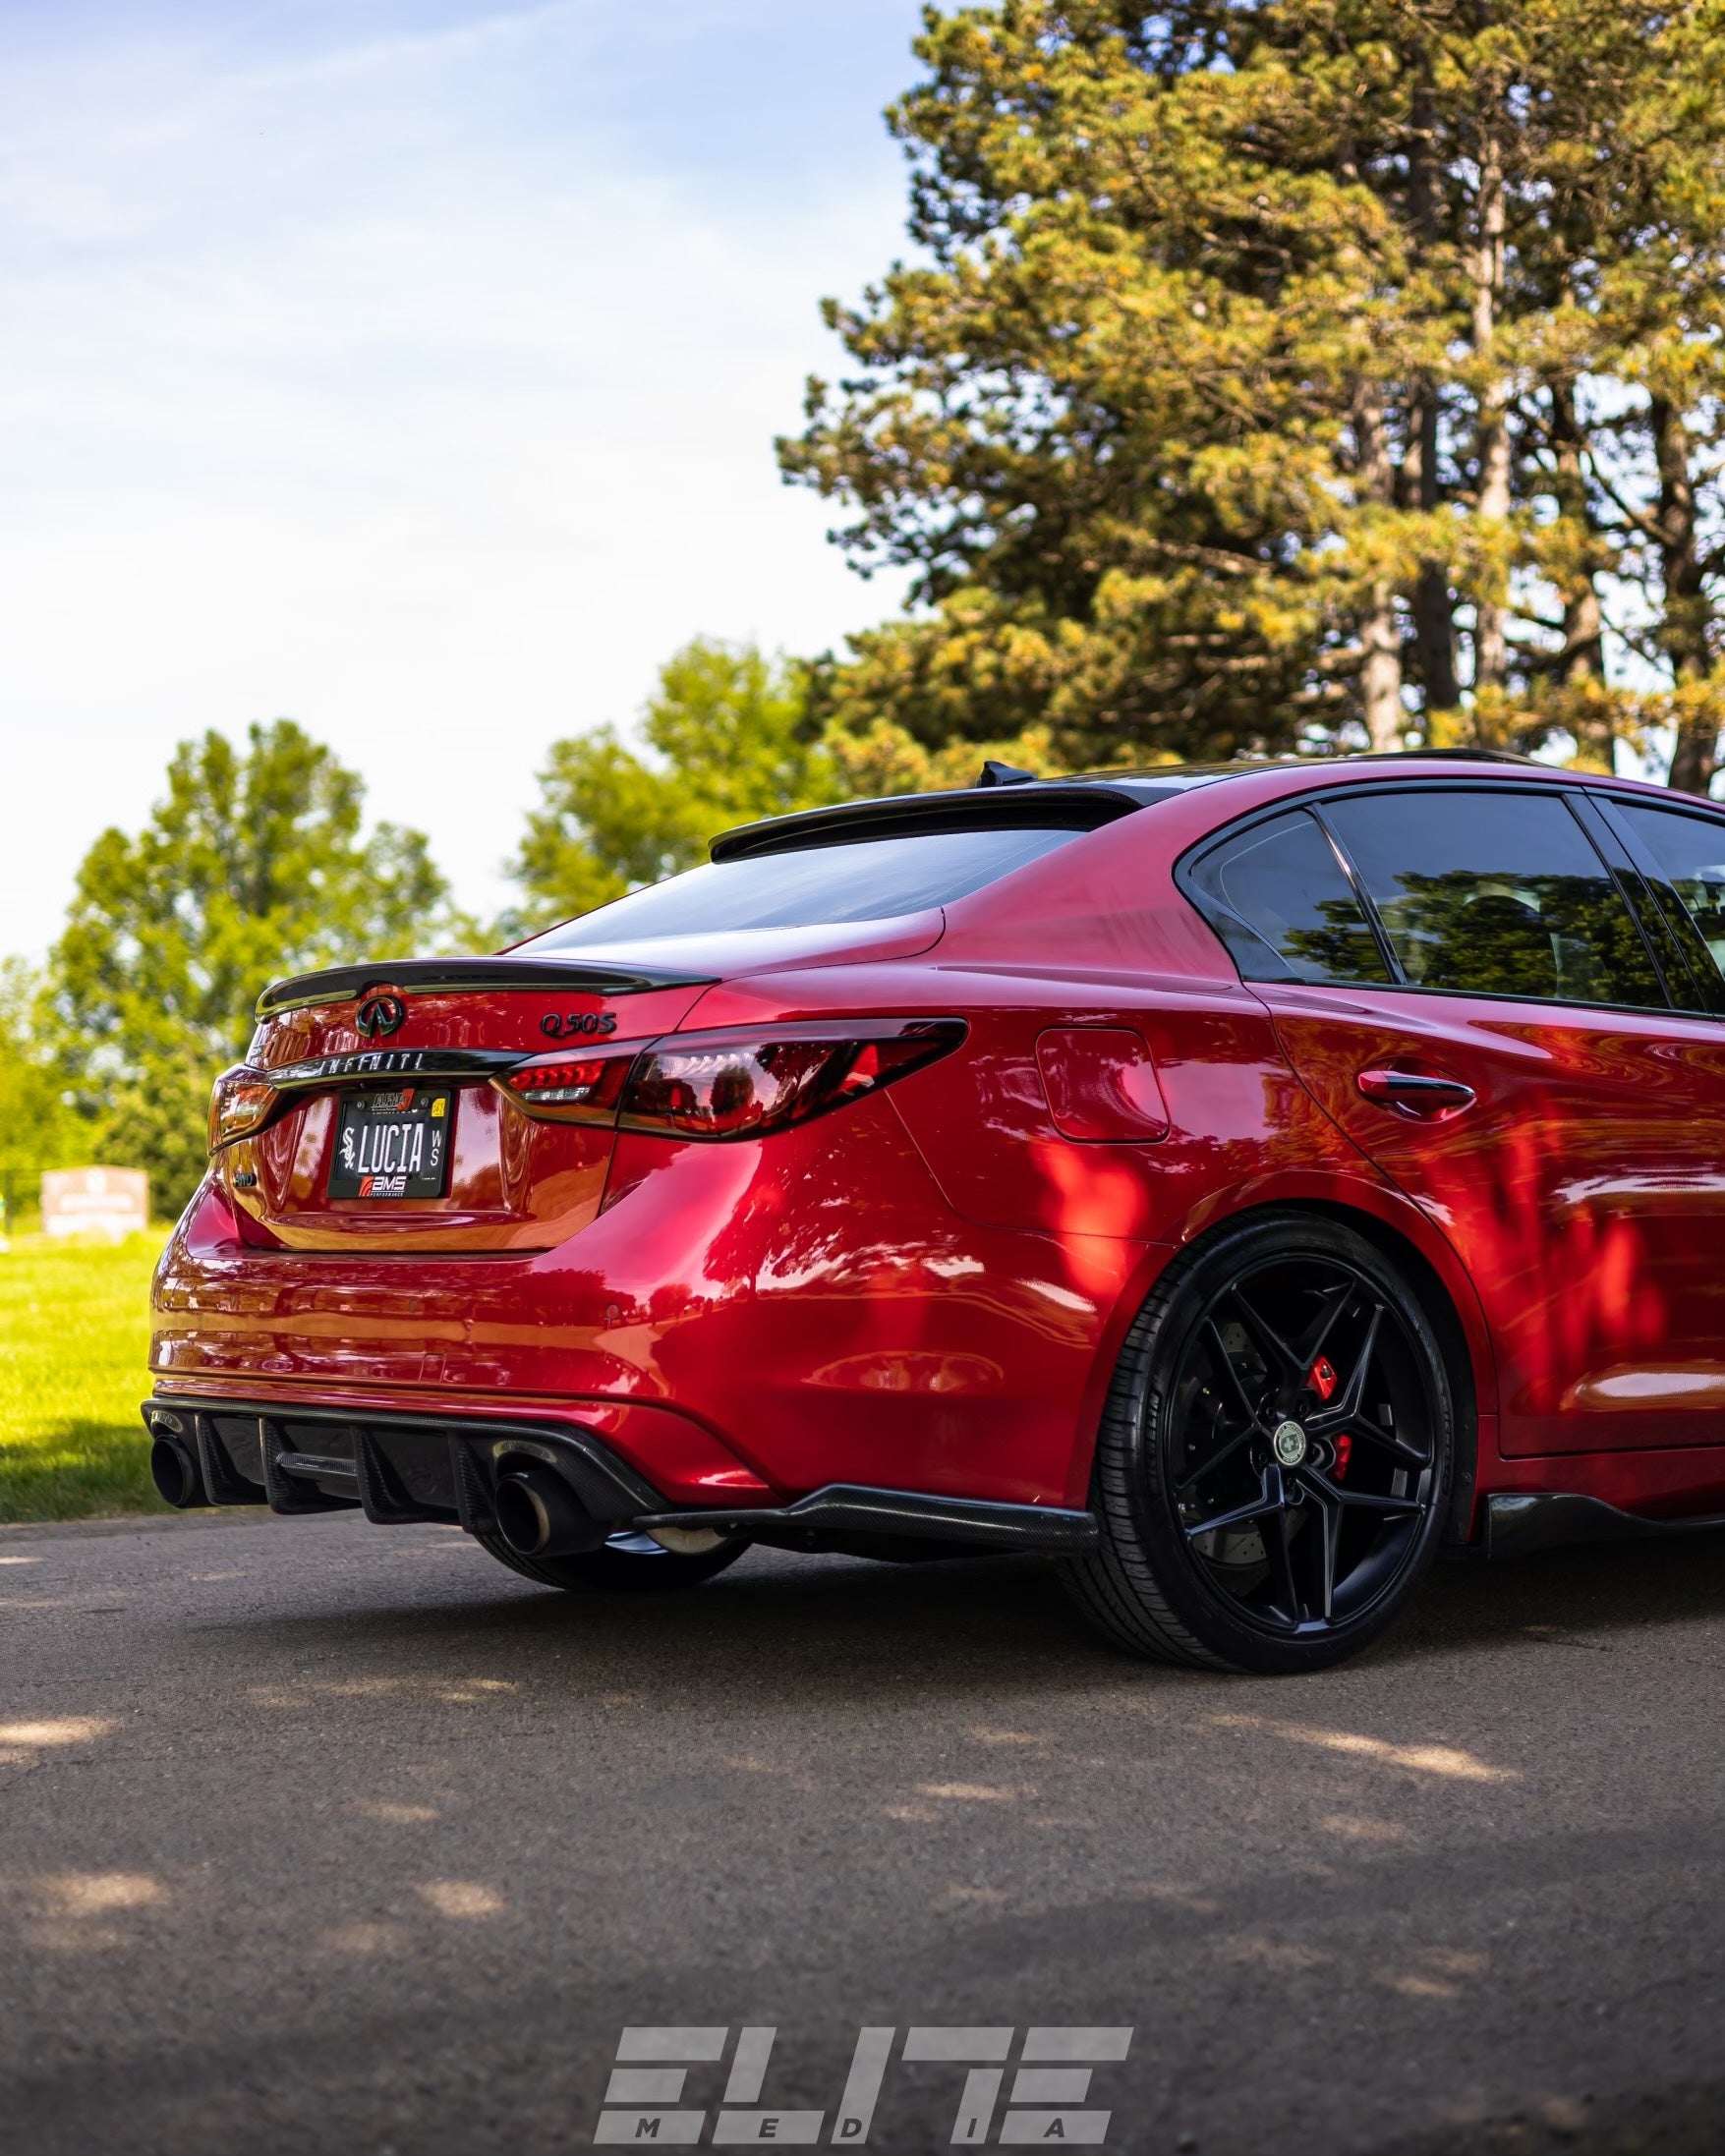 Stunning professional shot emphasizing the elegance and design of Jalisco's CF Carbon Fiber 'OG' Style Diffuser on a red Infiniti Q50 2018.